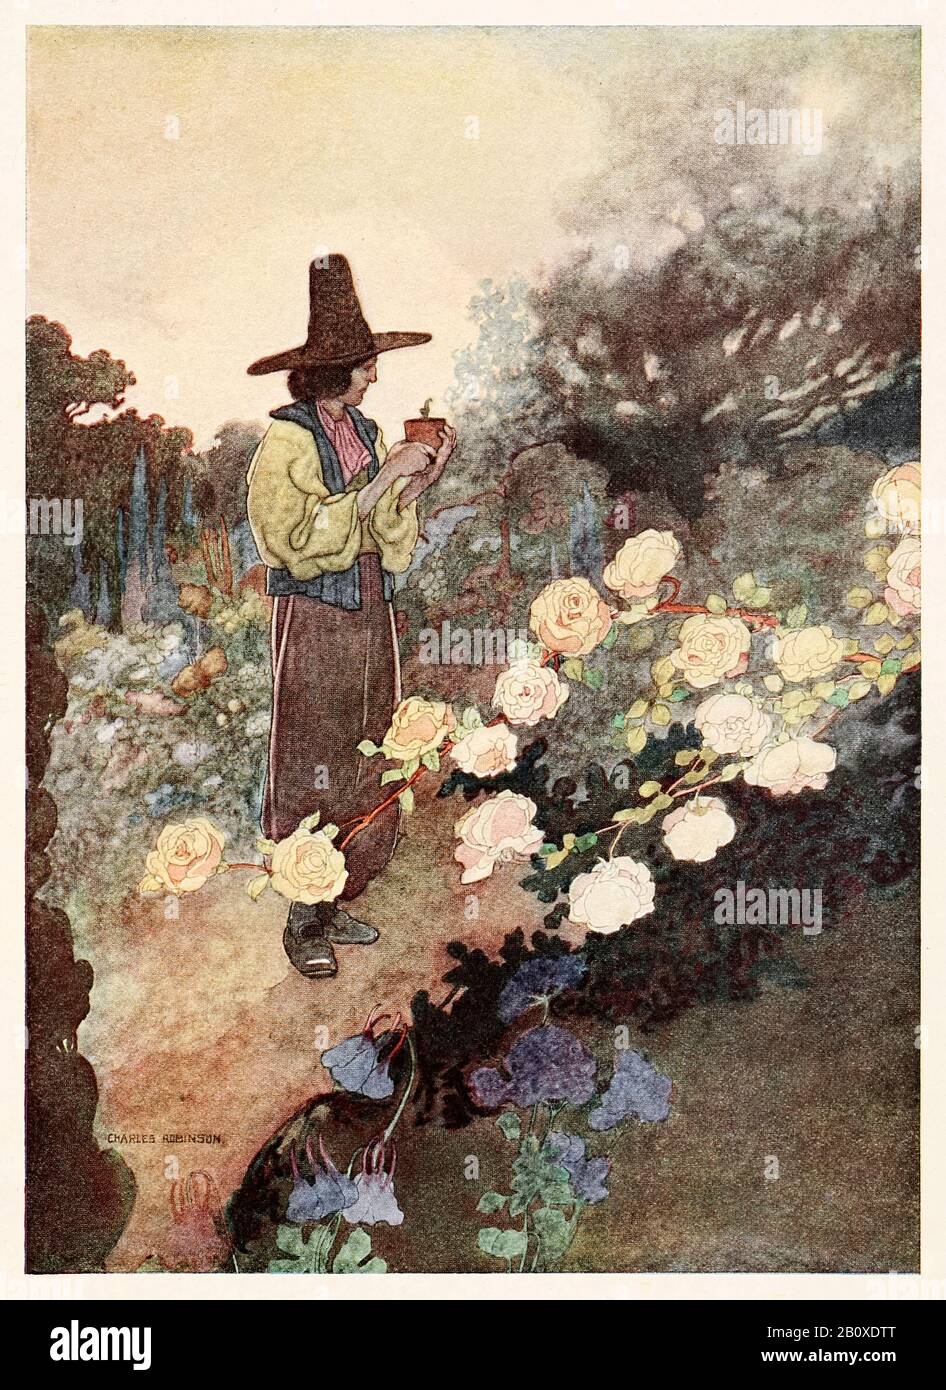 “Hans in the garden” from ‘The Devoted Friend’ in The Happy Prince and Other Tales by Oscar Wilde (1854-1900) illustrated by Charles Robinson (1870-1937). See more information below. Stock Photo